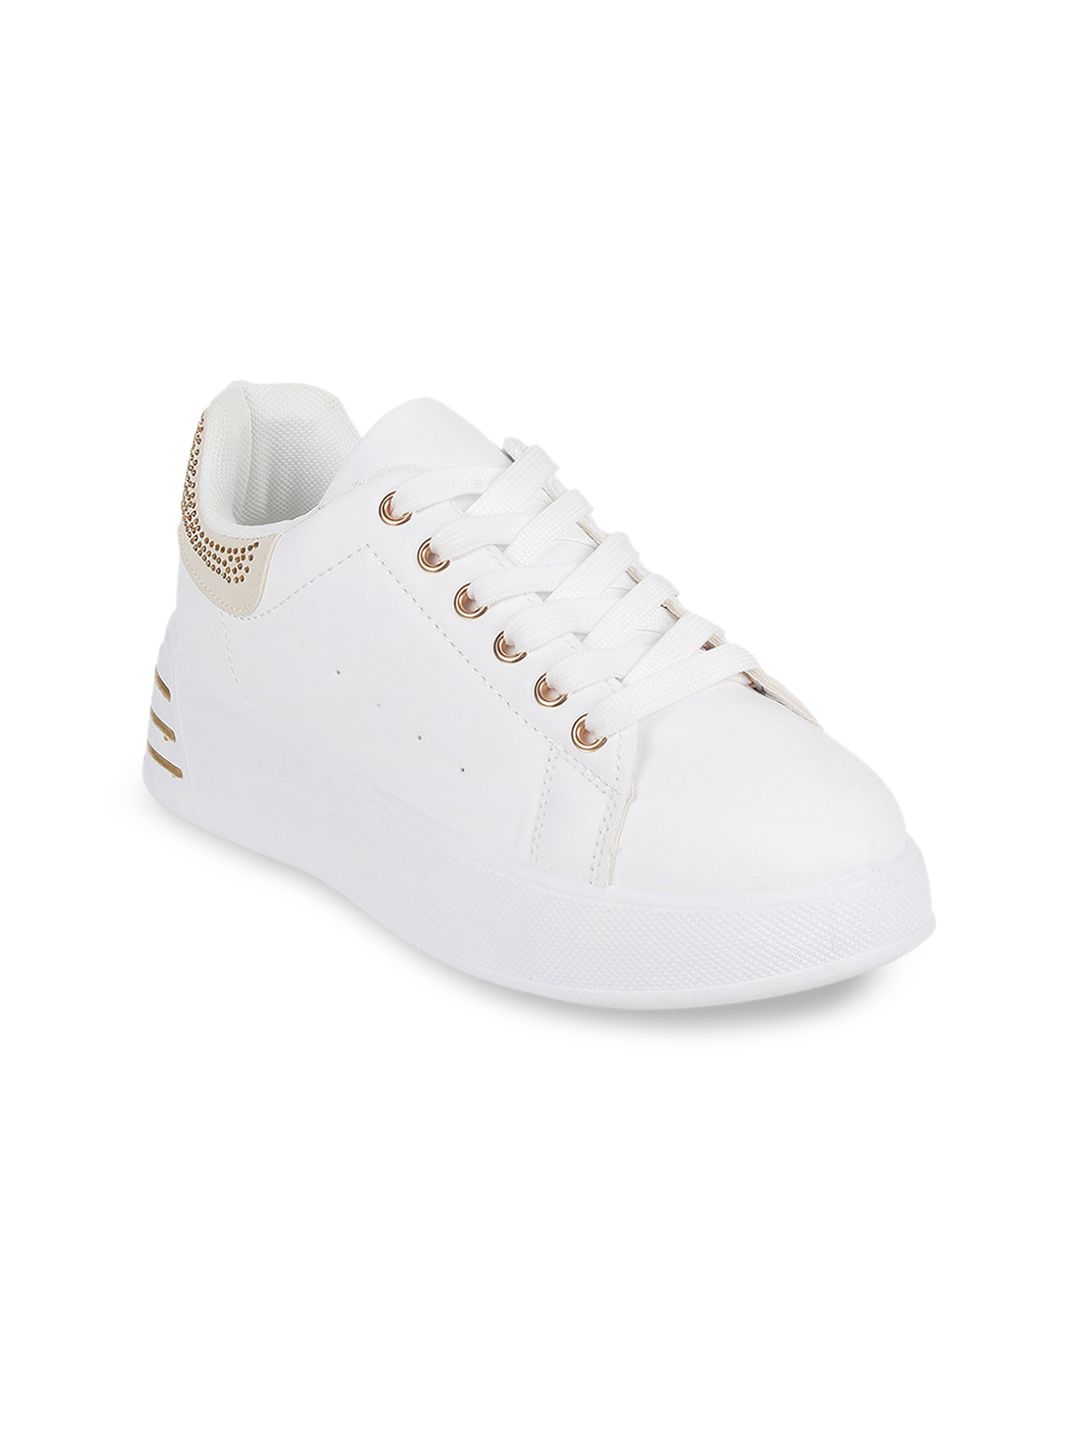 WALKWAY by Metro Women Gold-Toned Sneakers Price in India